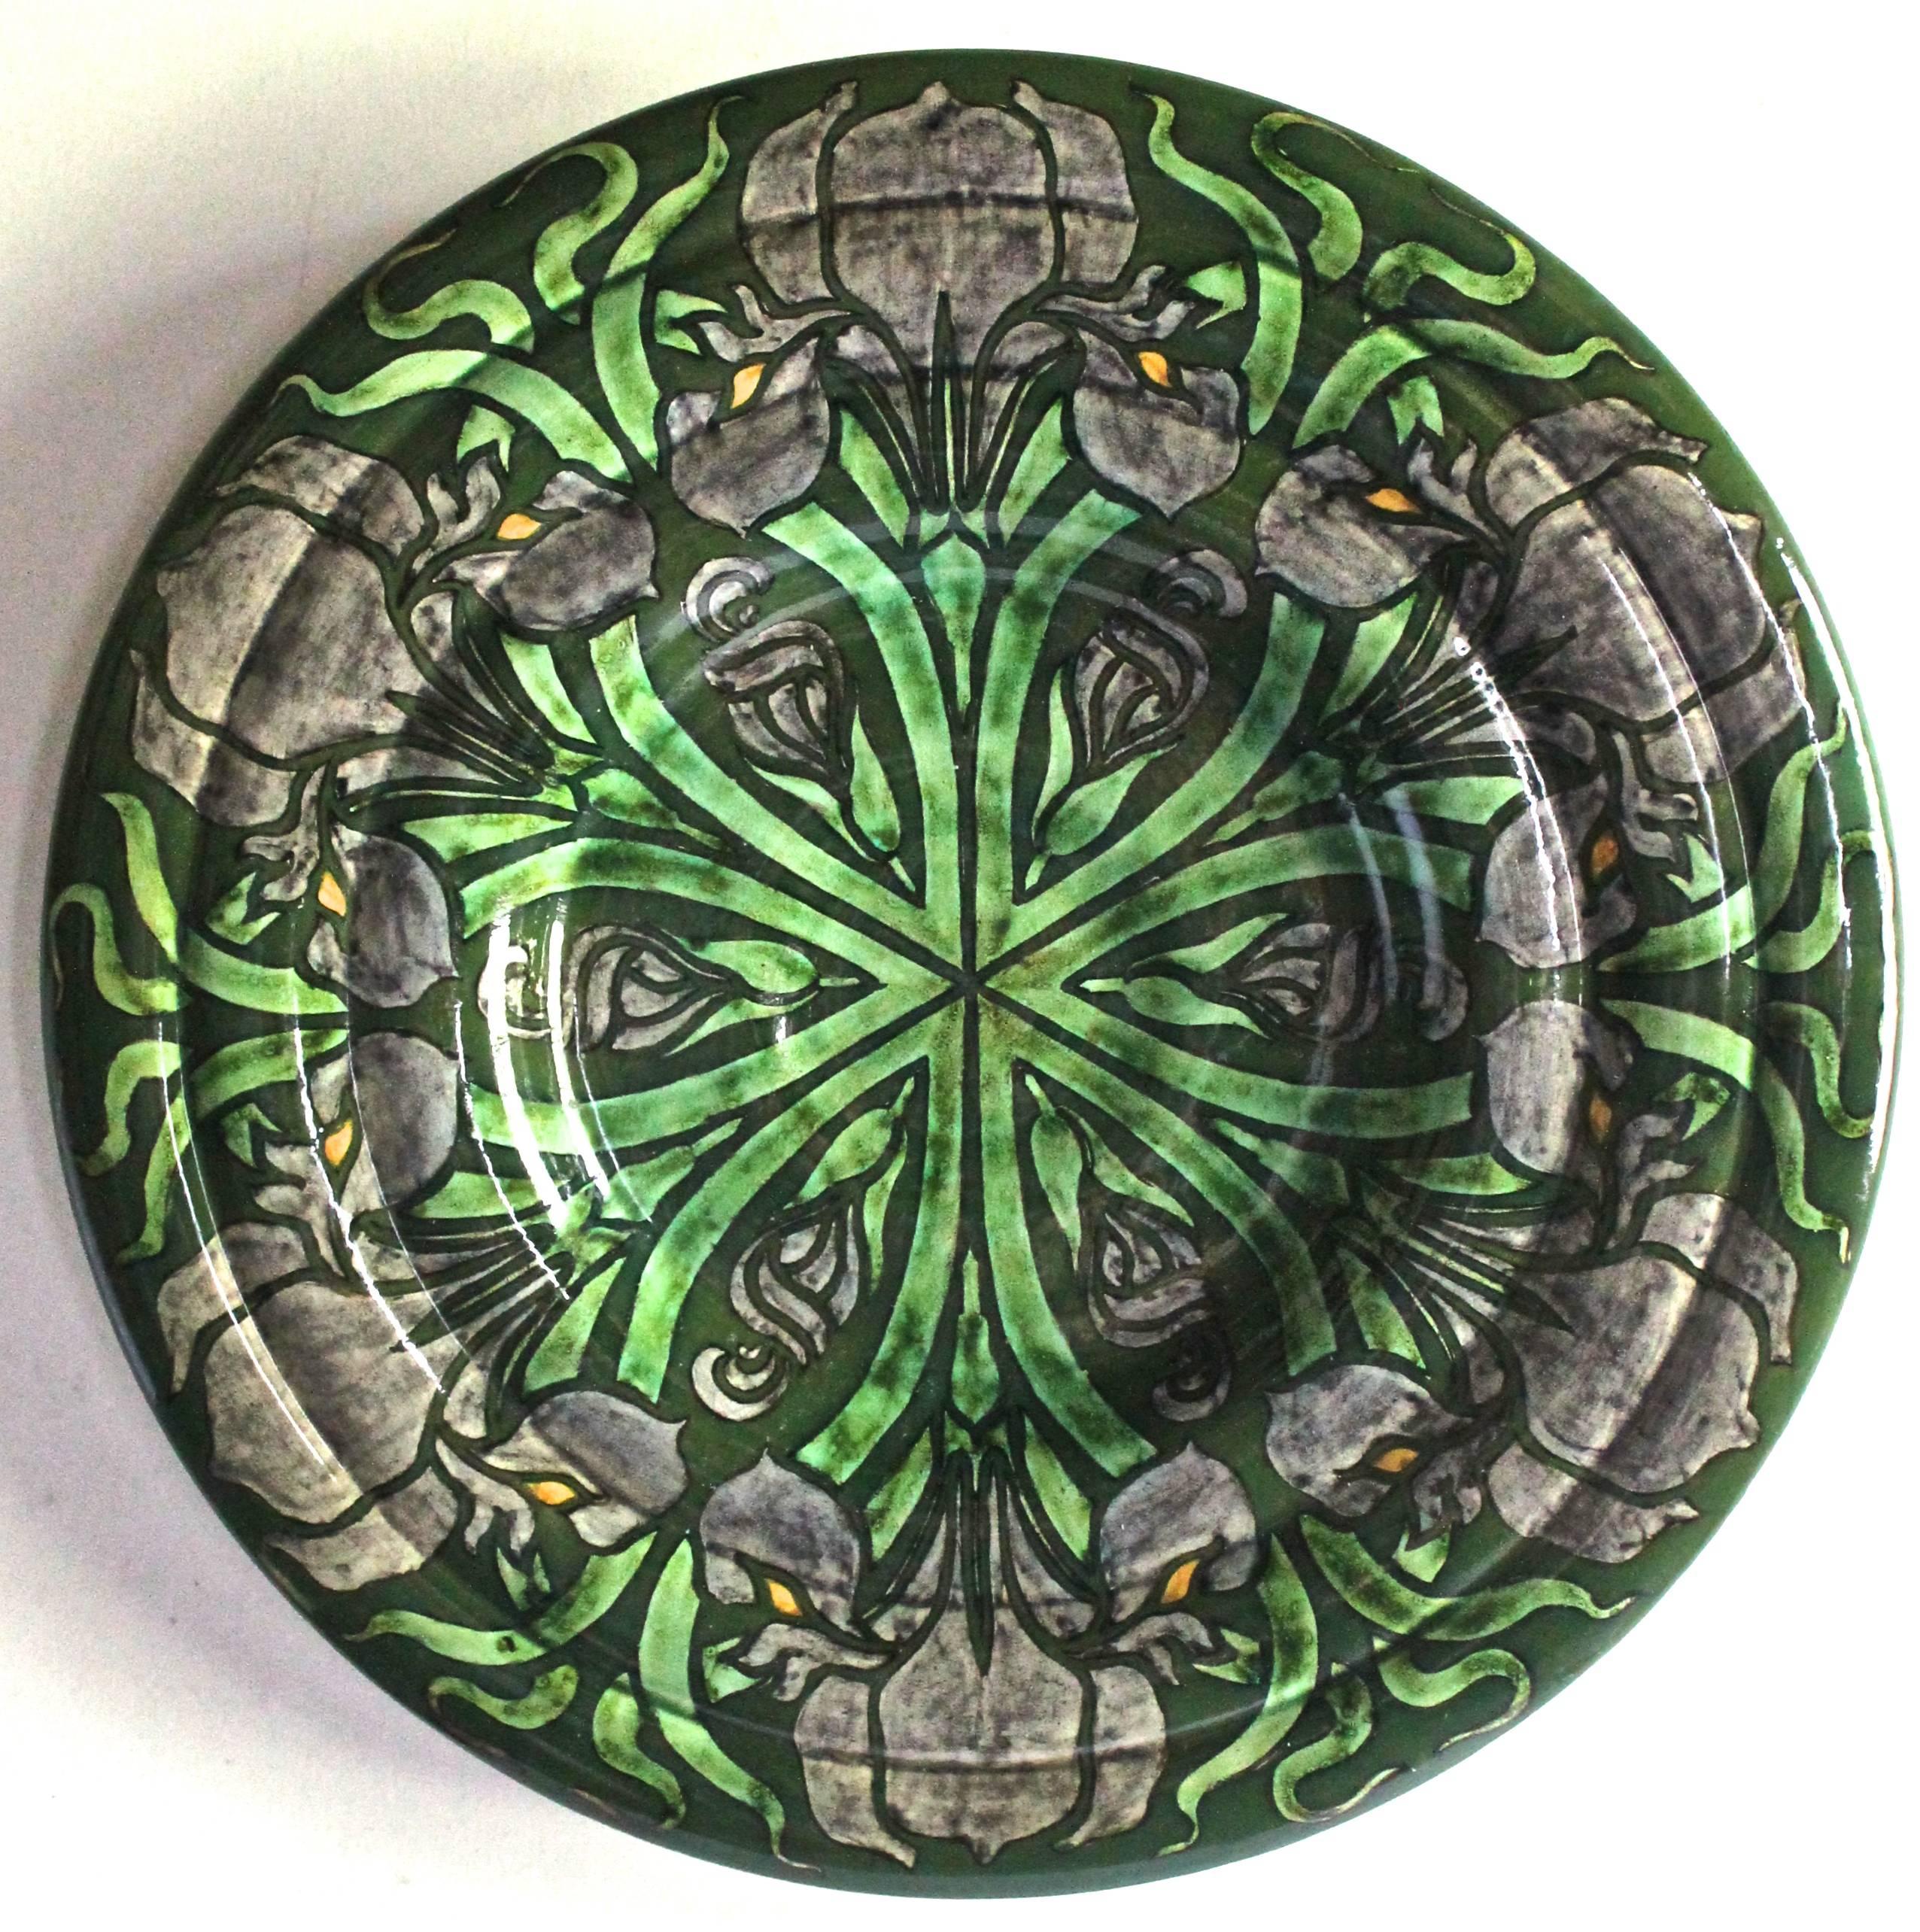 A large and unique hand-painted decorative wall plate. Designer unknown but marked with a WM.